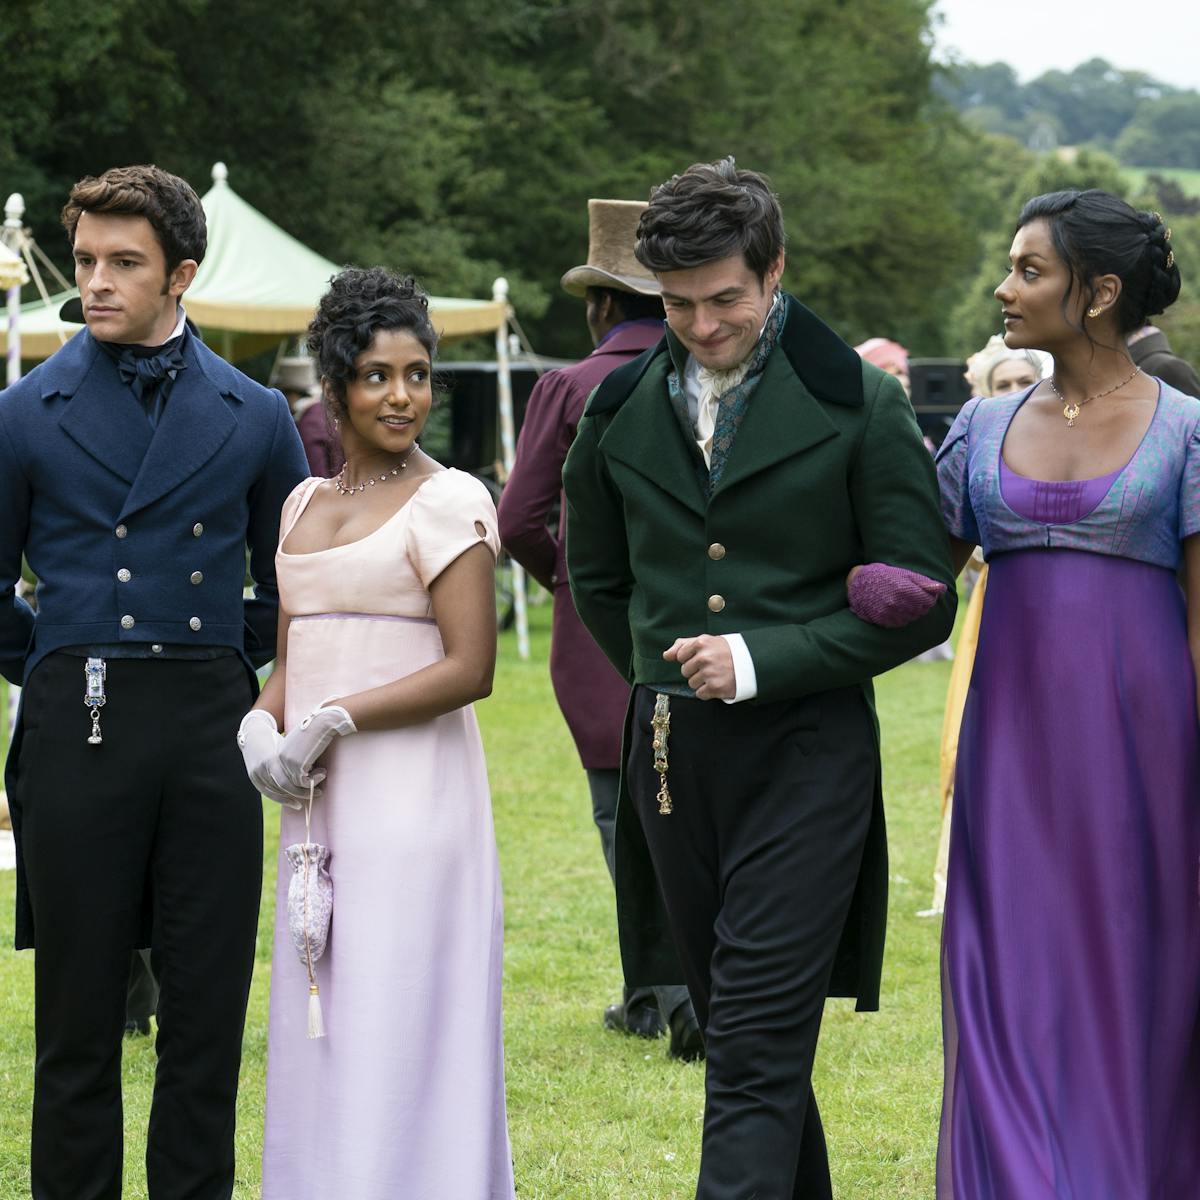 Ruth Gemmell, Jonathan Bailey, Charithra Chandran, Rupert Young, and Simone Ashley stand together outside. Ruth wears a light pink dress, Bailey wears a beautiful navy suit, and Chandran wears a white dress, Young wears a green jacket, and Ashley wears a purple dress.